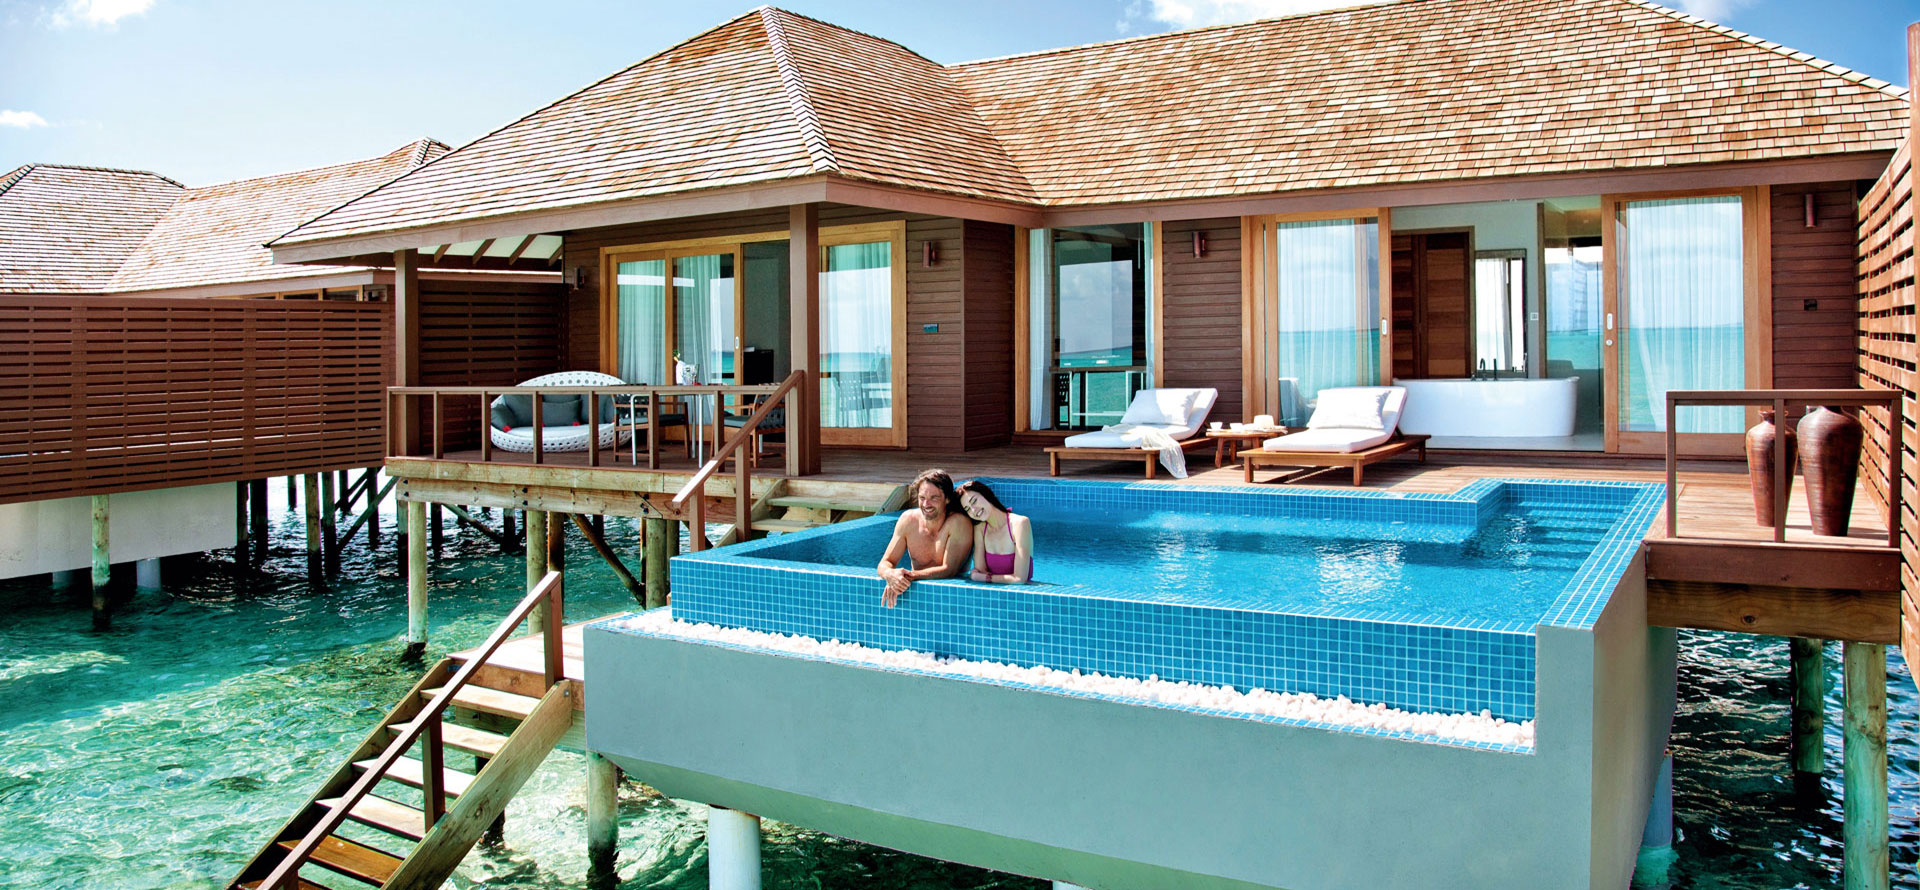 Couple in swimming pool in Maldives overwater bungalow.